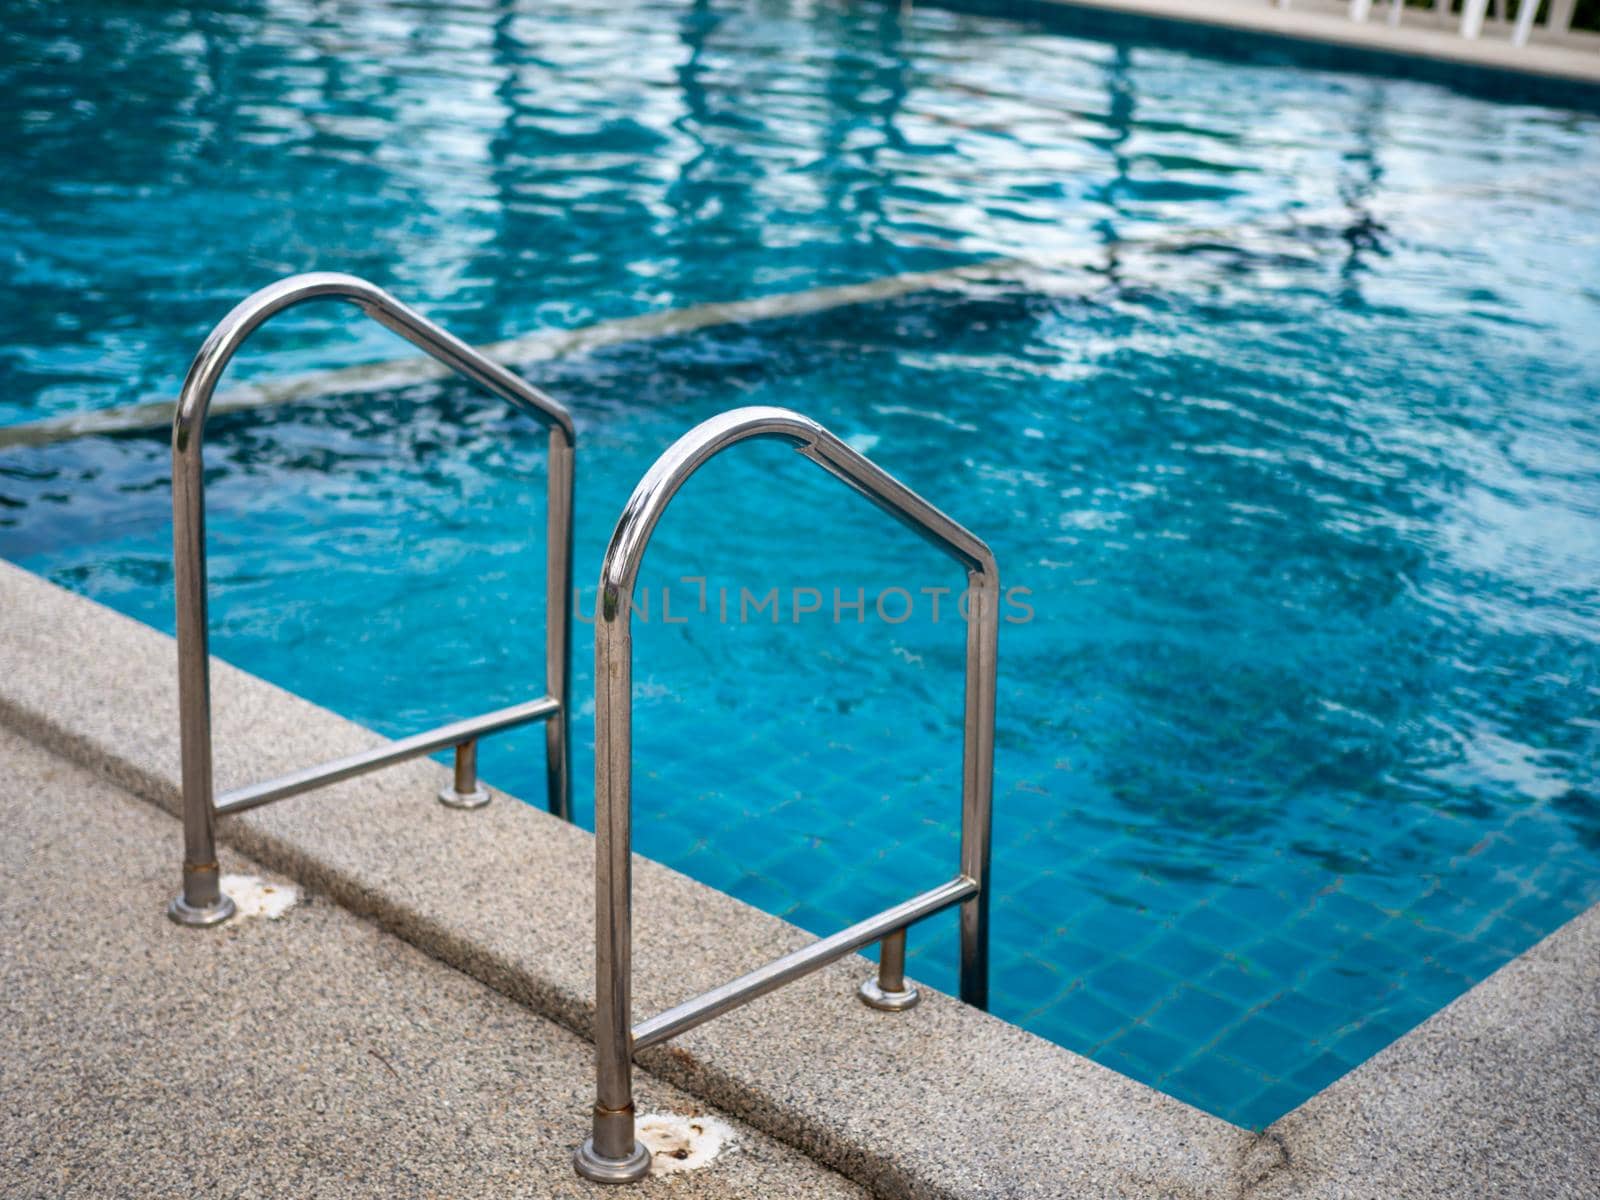 Stainless steel stairs to the pool. handrails up and down the pool.